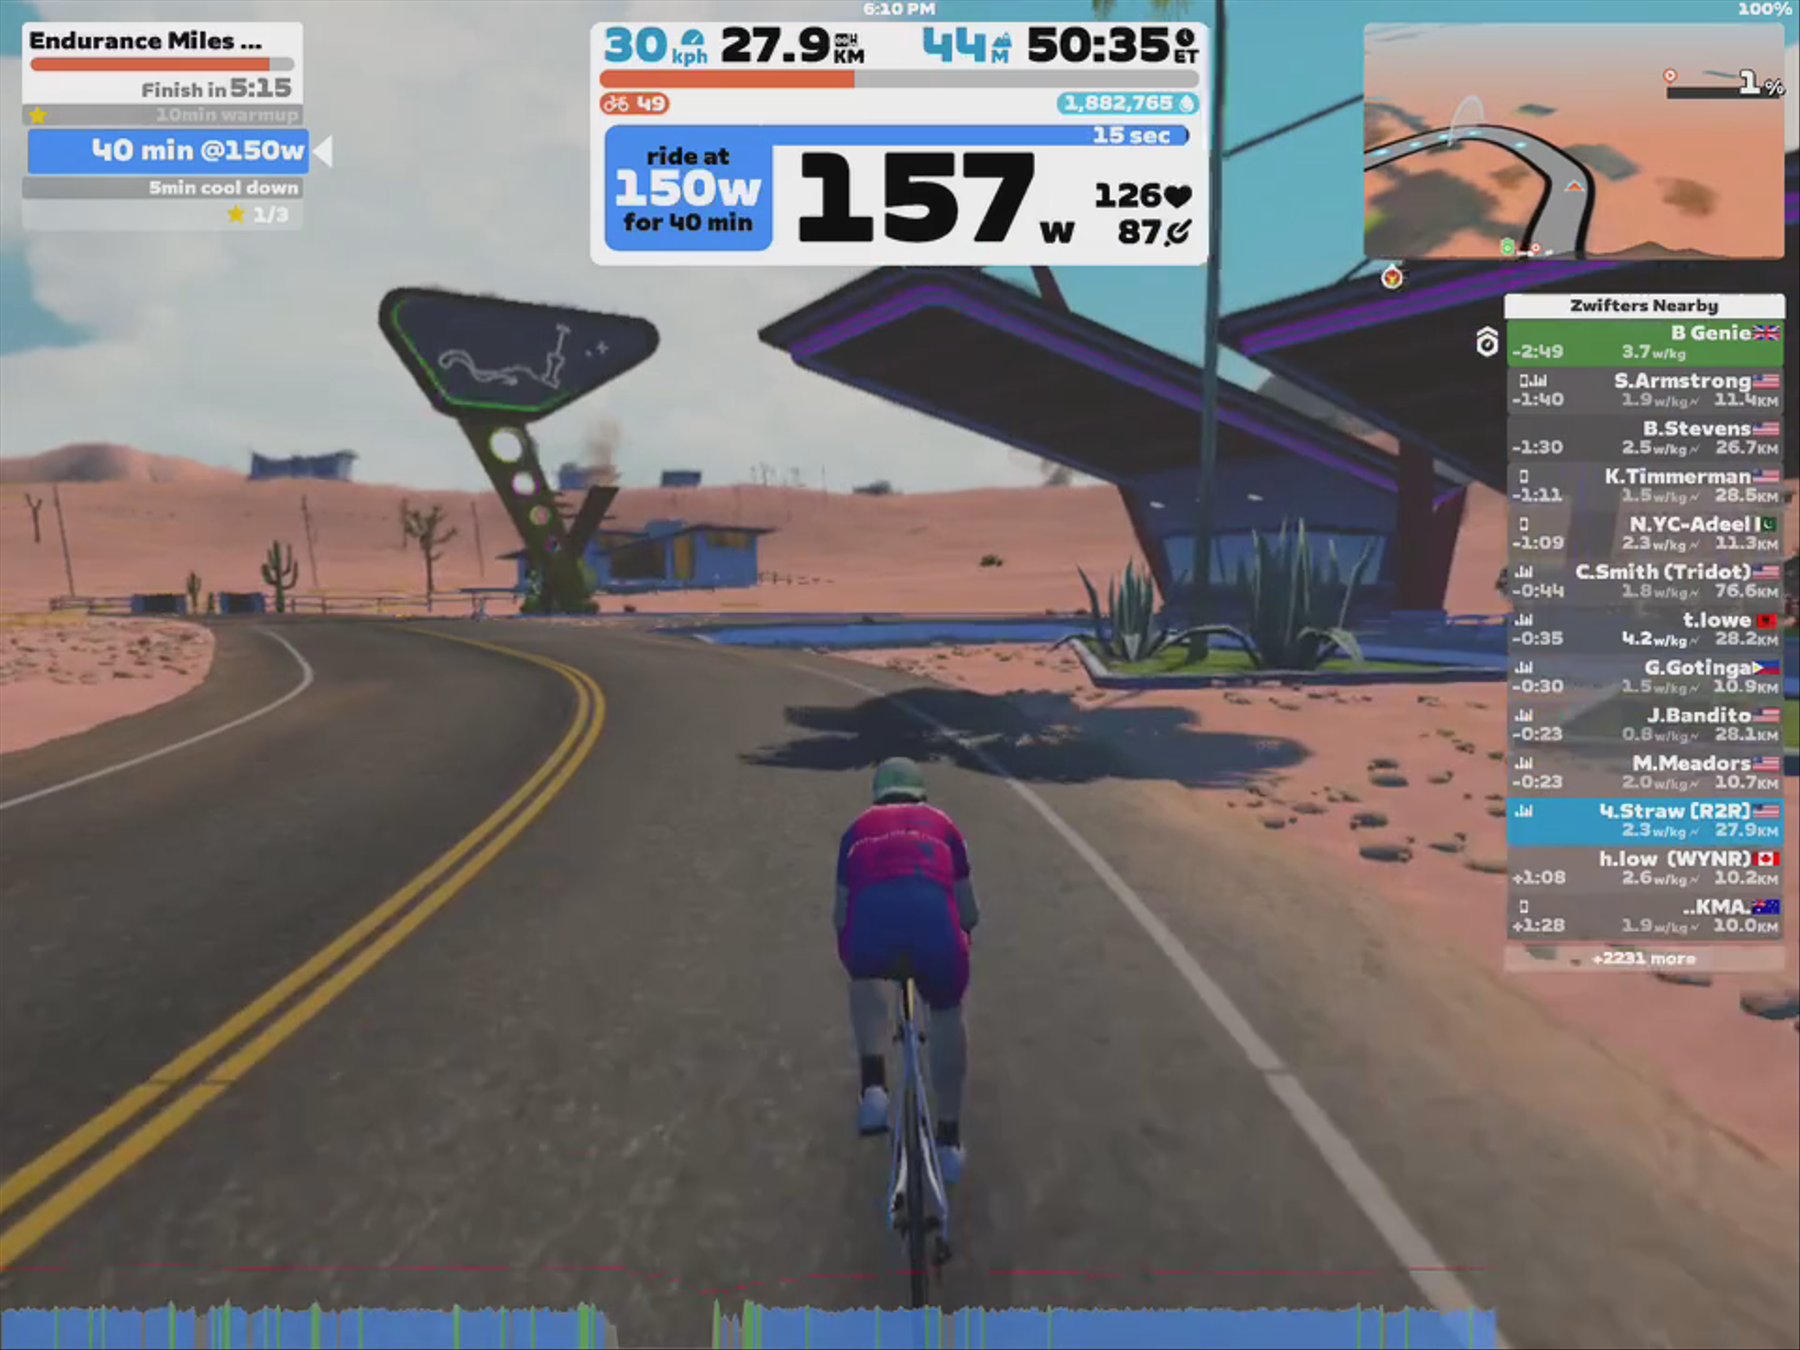 Zwift - Endurance Miles 1.00hrs in Watopia